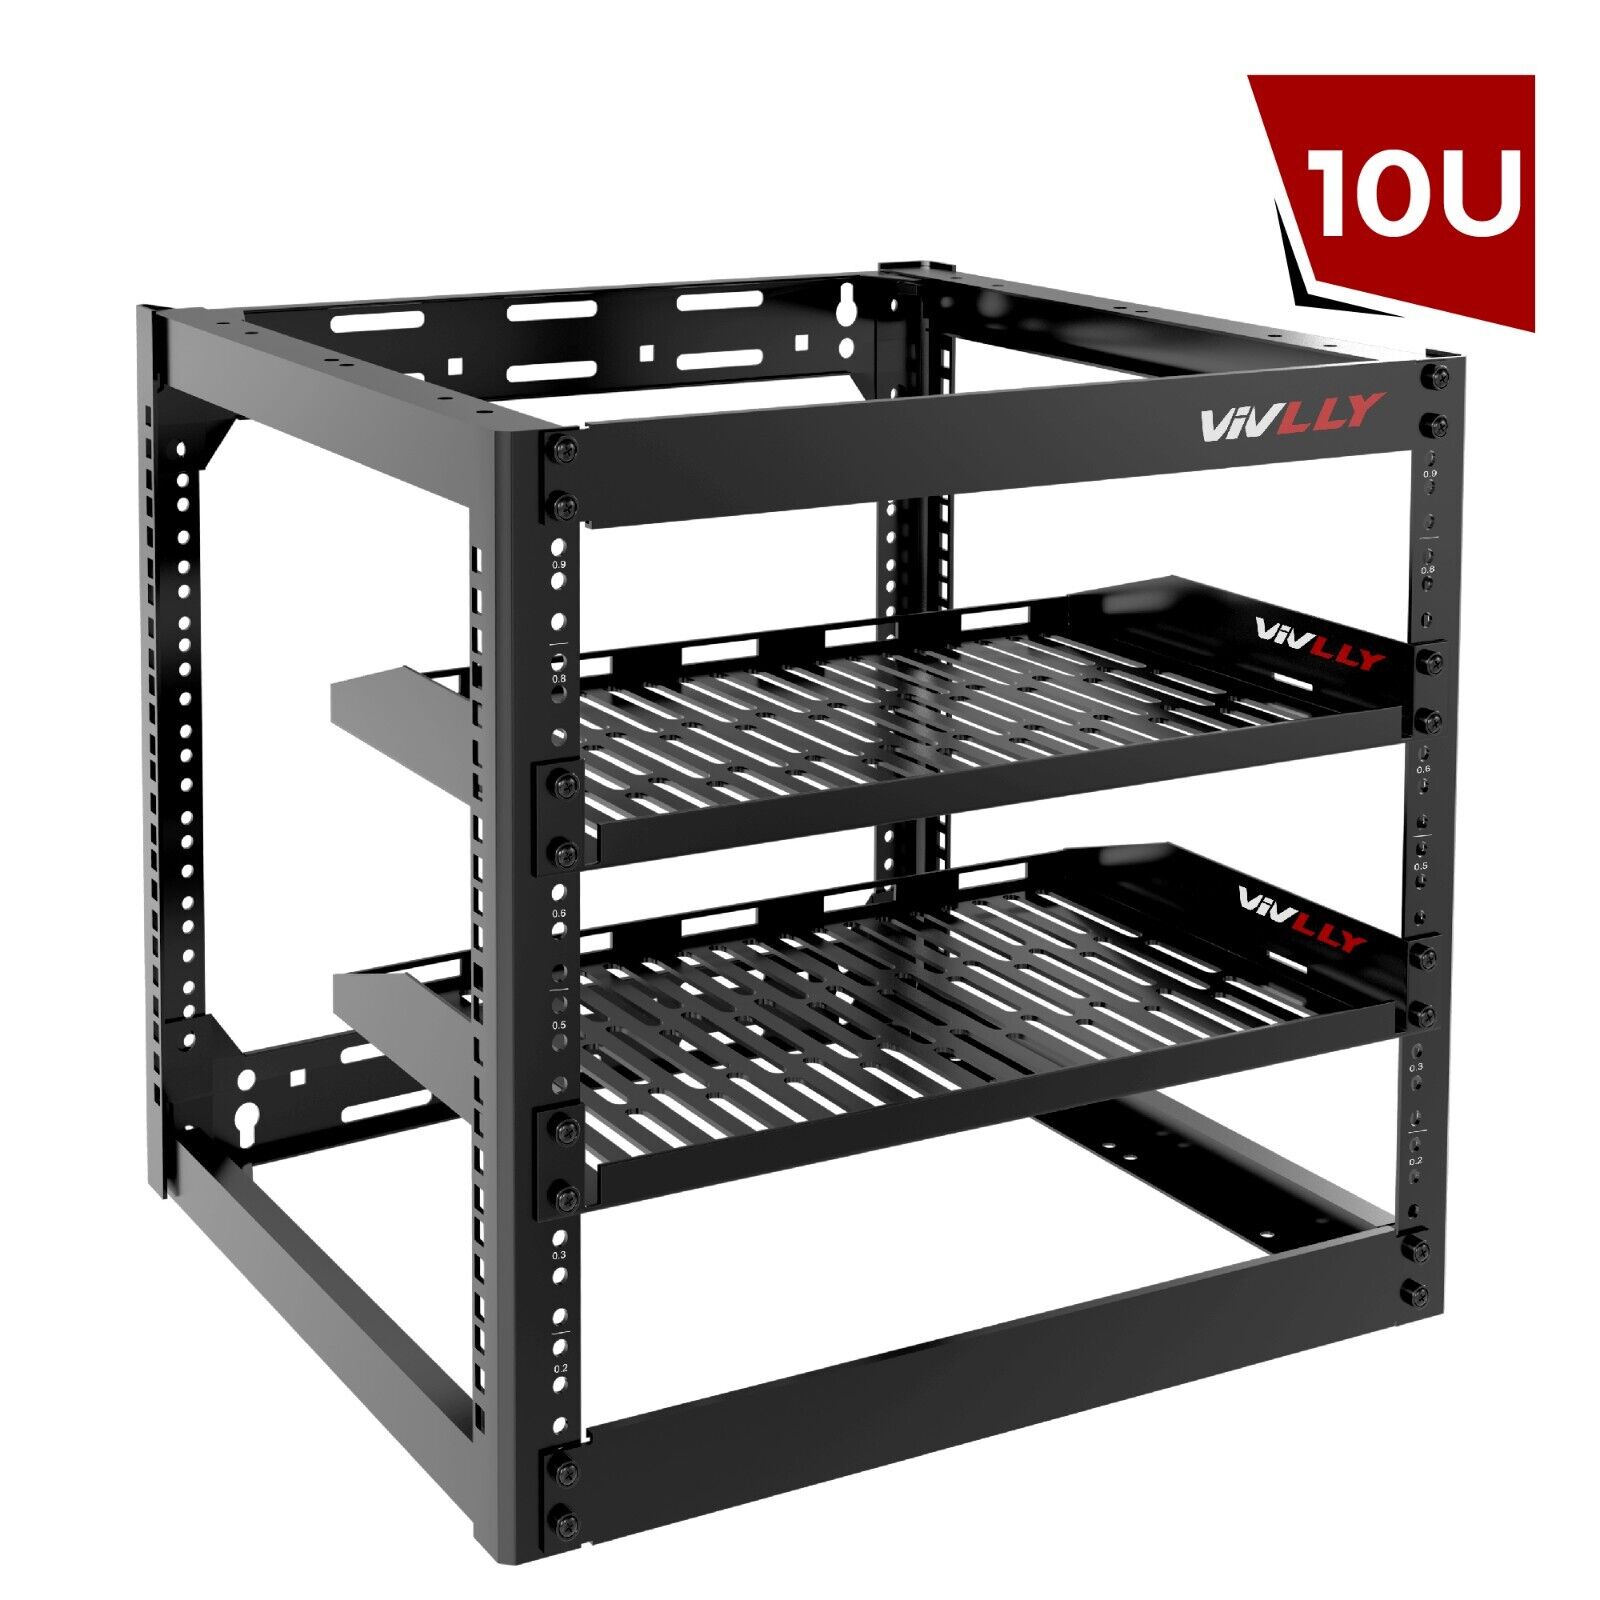 10U Network Rack Wall Mountable Heavy Duty 4 Post Design Holds All Your Networki